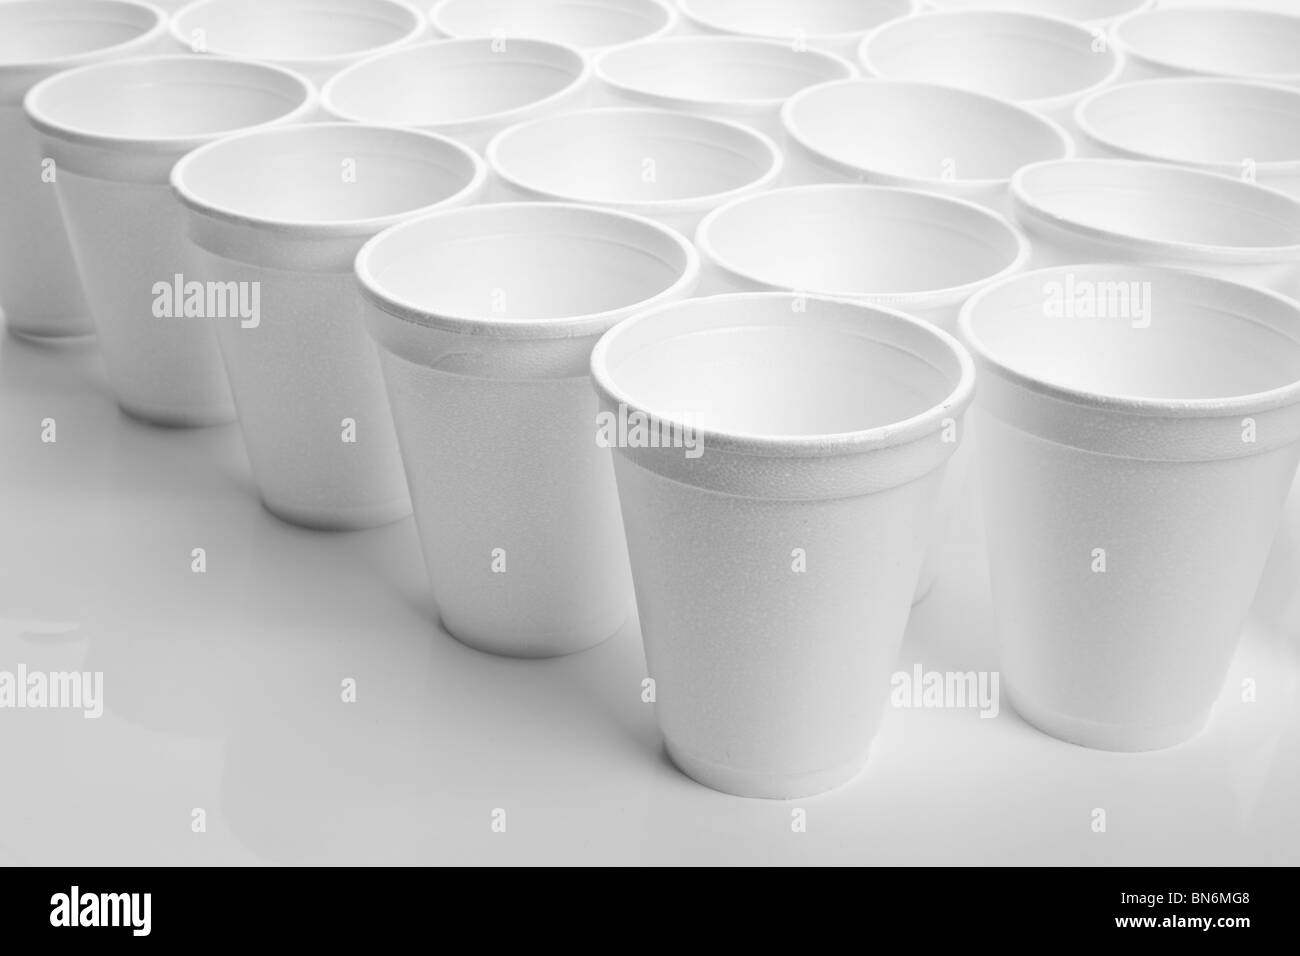 Disposable Cup close up shot Stock Photo